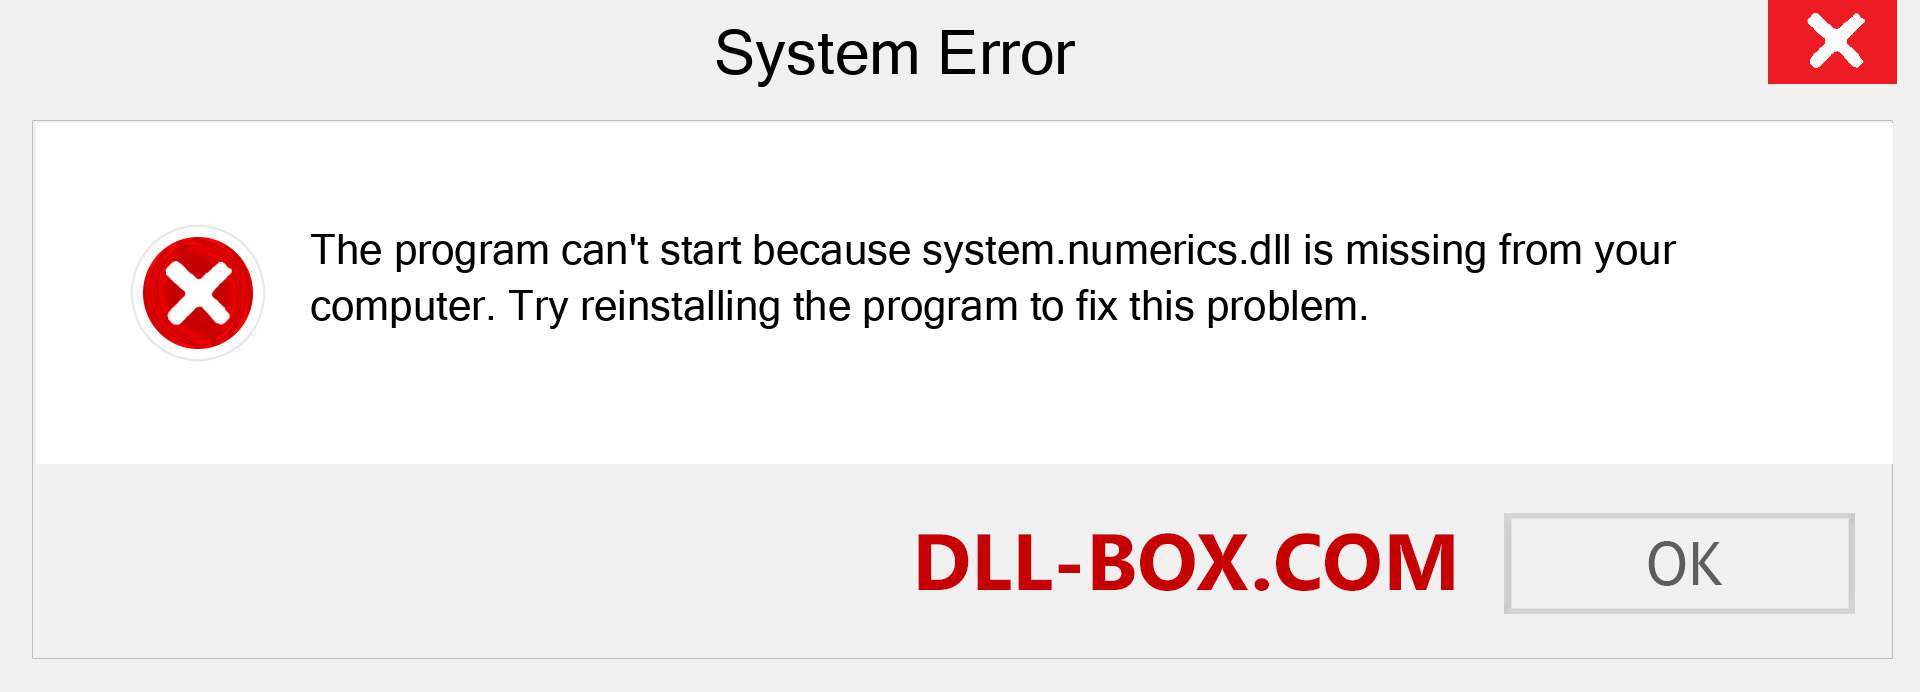  system.numerics.dll file is missing?. Download for Windows 7, 8, 10 - Fix  system.numerics dll Missing Error on Windows, photos, images